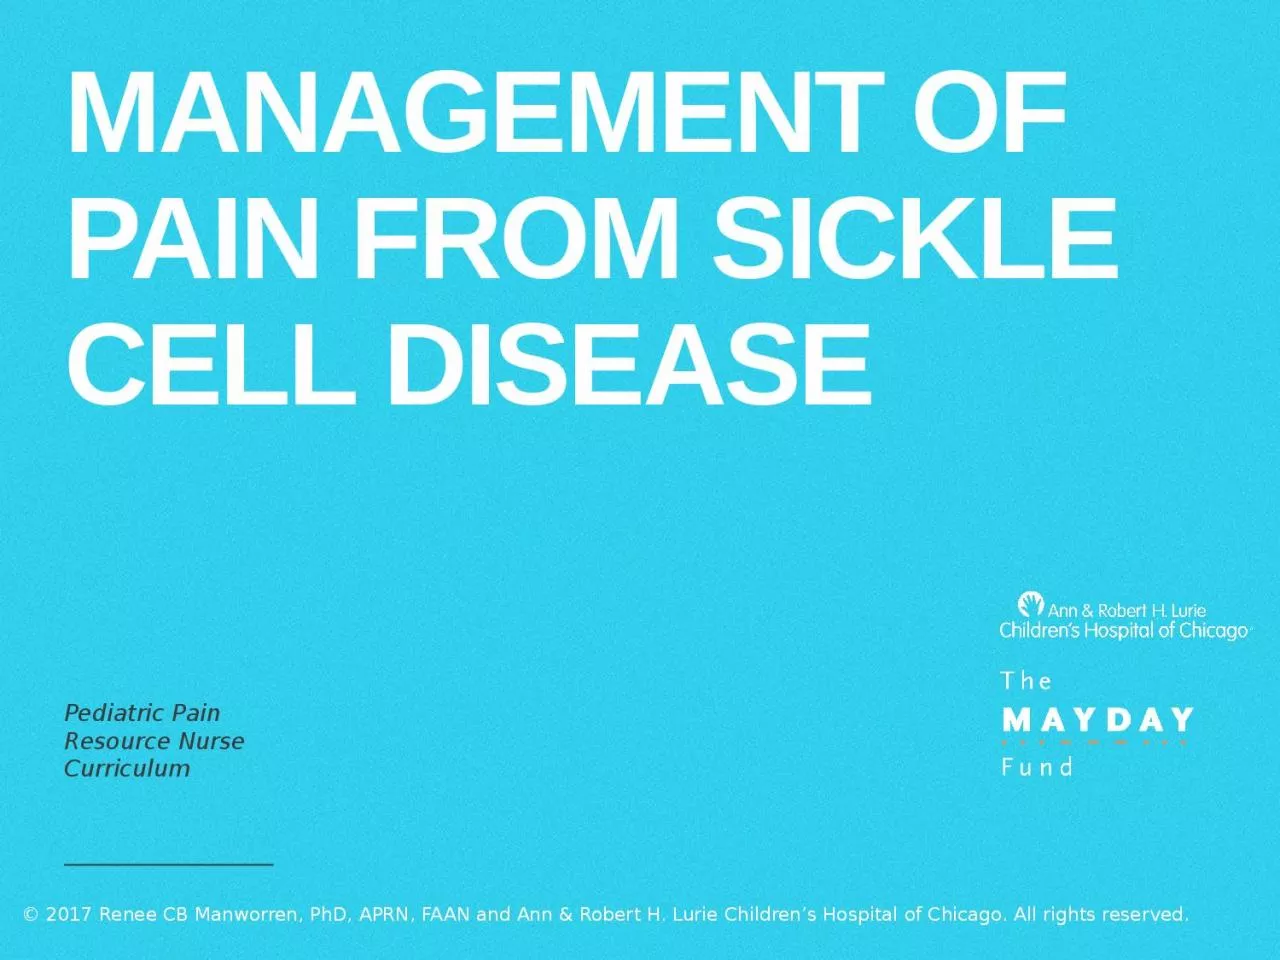 Management of Pain from Sickle Cell Disease